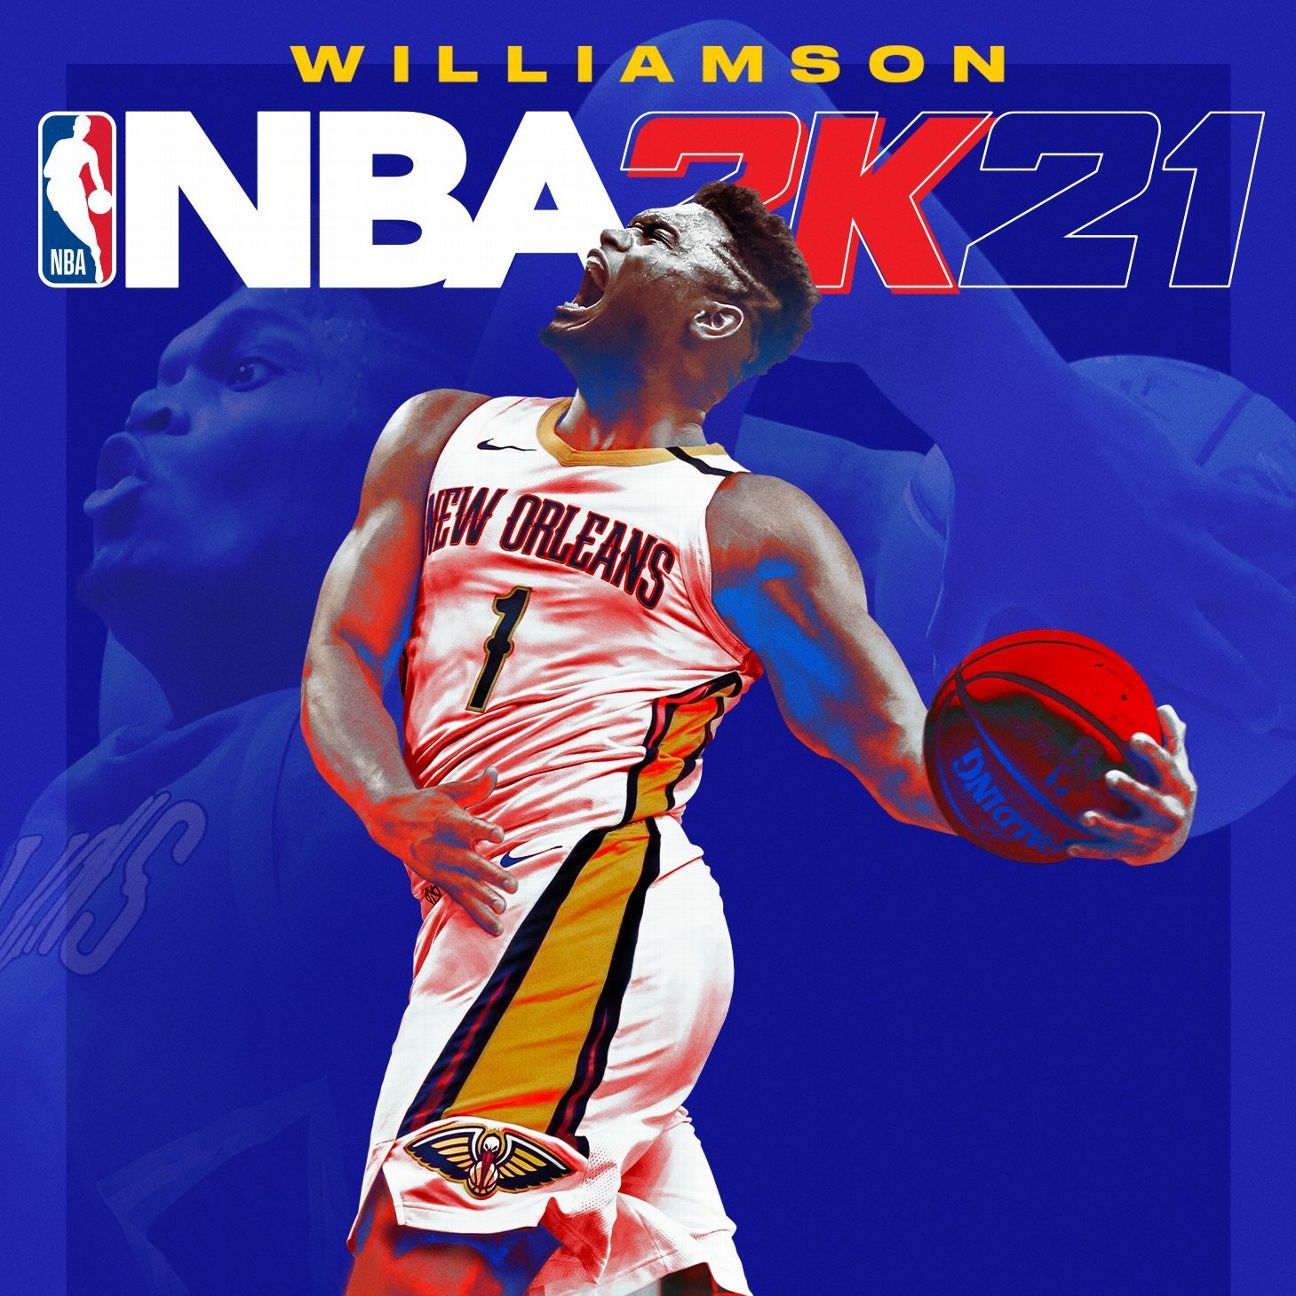 Zion named one of 3 NBA 2K21 cover athletes